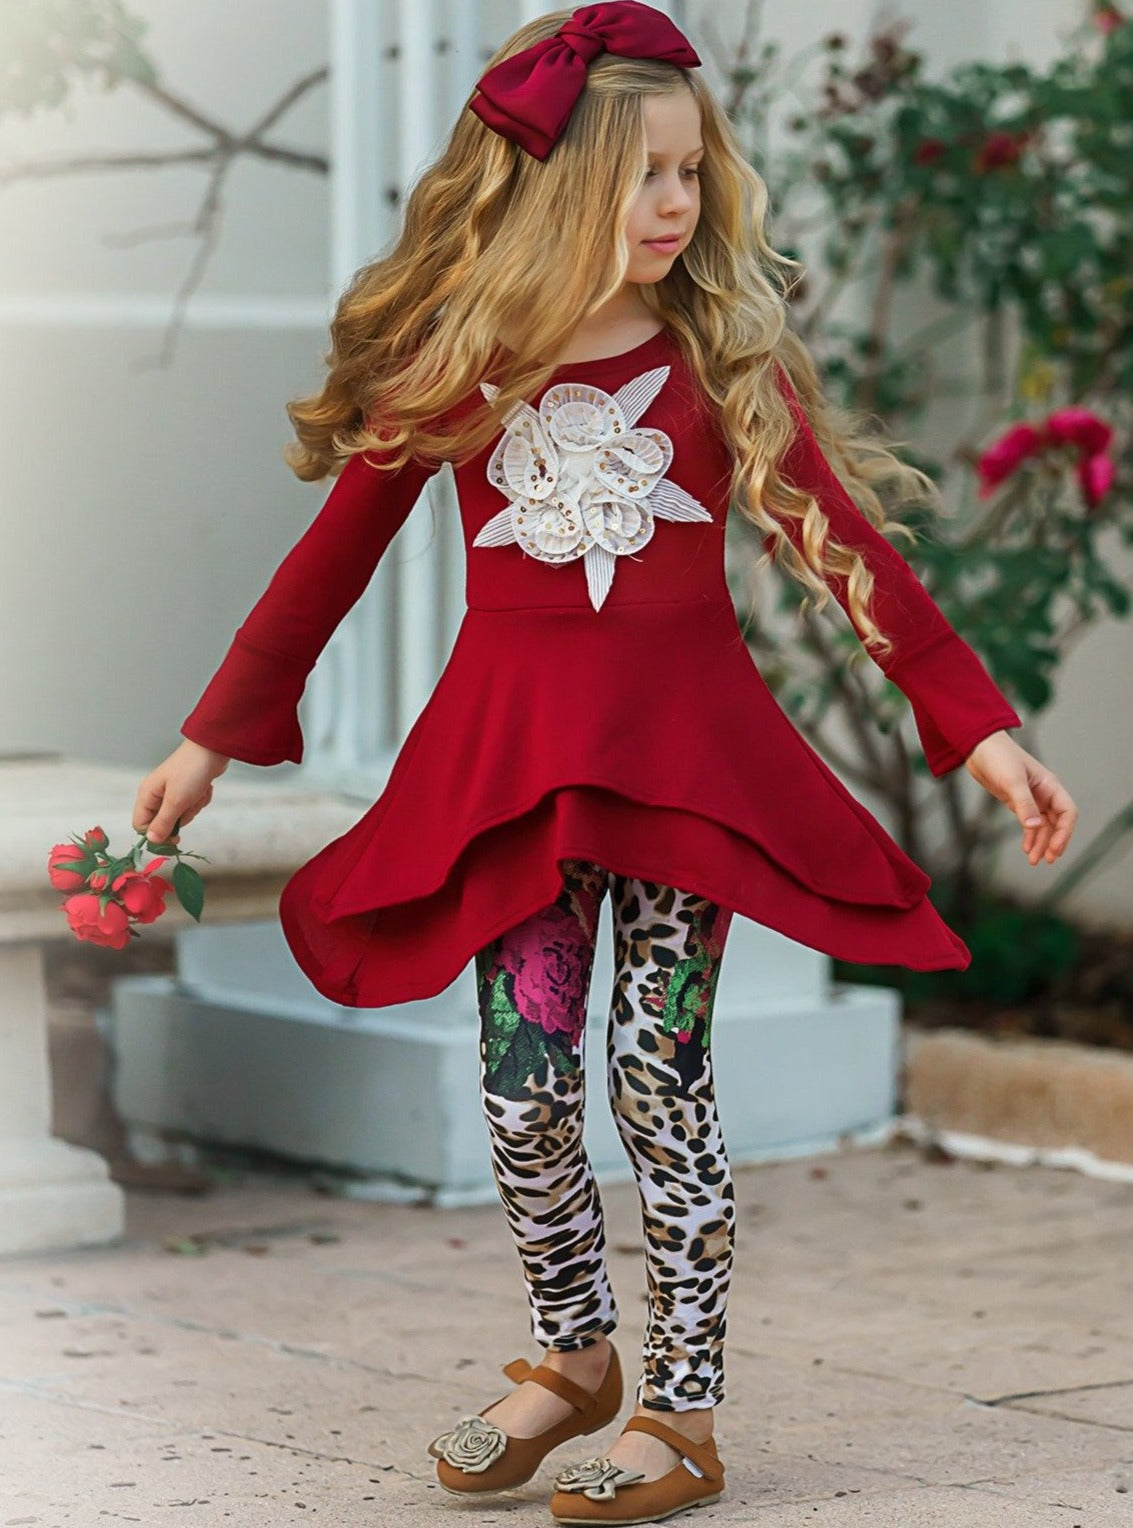 Girls Double Tiered Side Tail Applique Tunic & Printed Leggings Set - Girls Fall Dressy Set